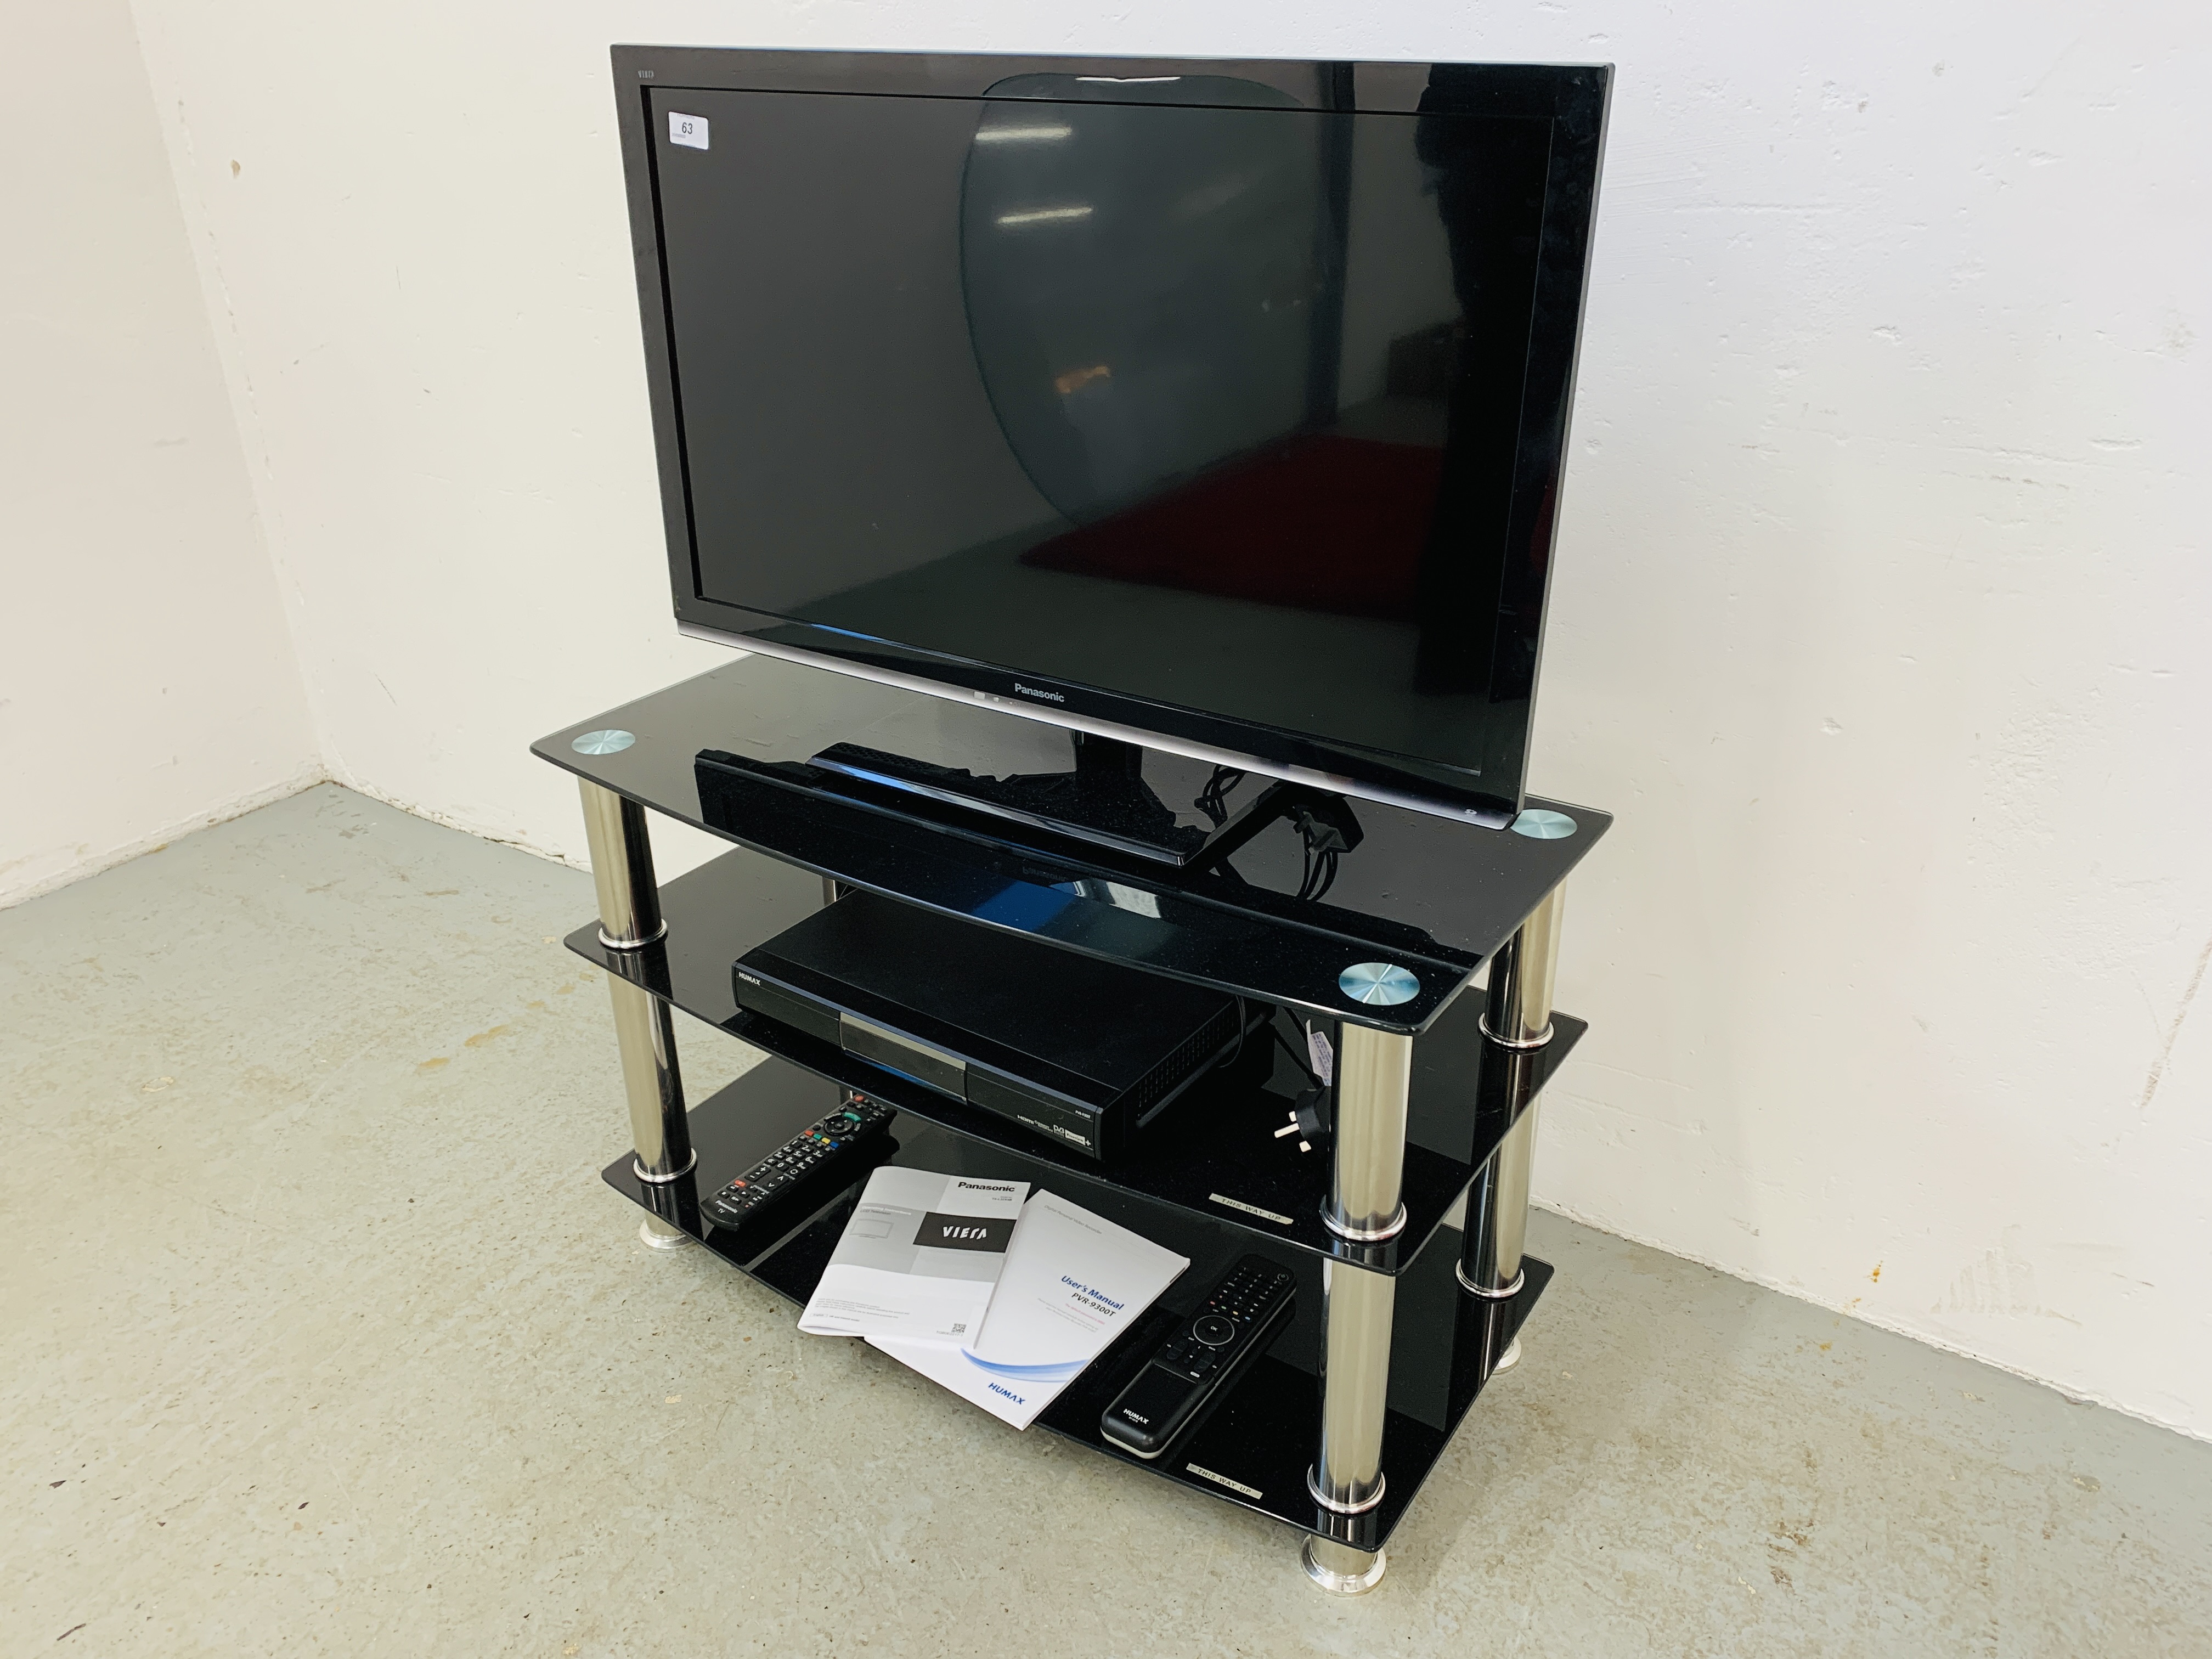 A PANASONIC VIERA 32 INCH TELEVISION WITH REMOTE ON GLASS THREE TIER STAND + HUMAX HD RECORDER WITH